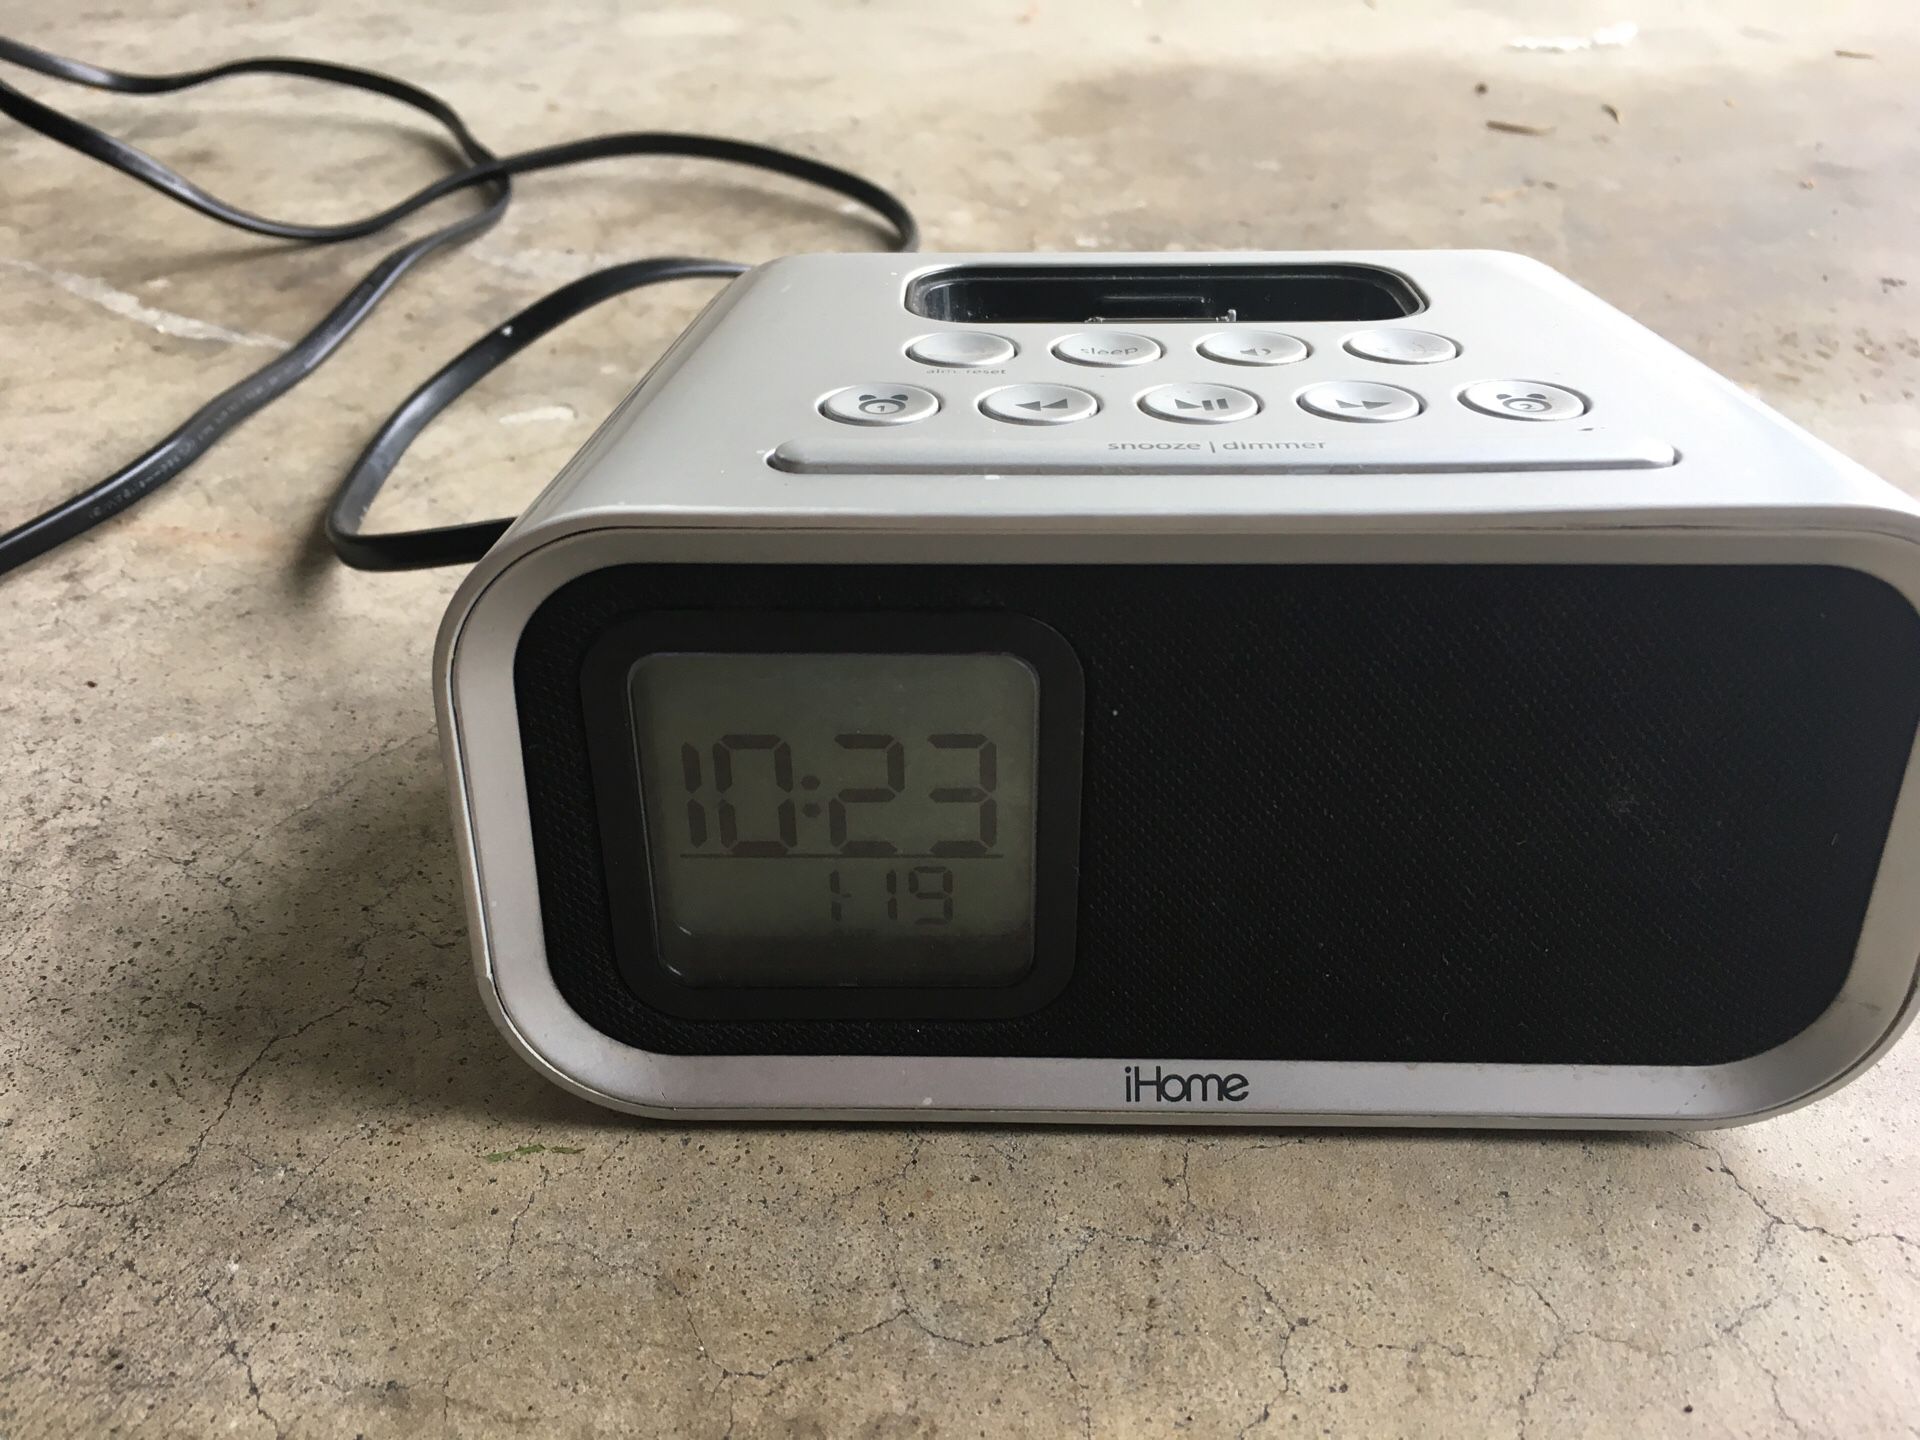 IHome player and alarm clock